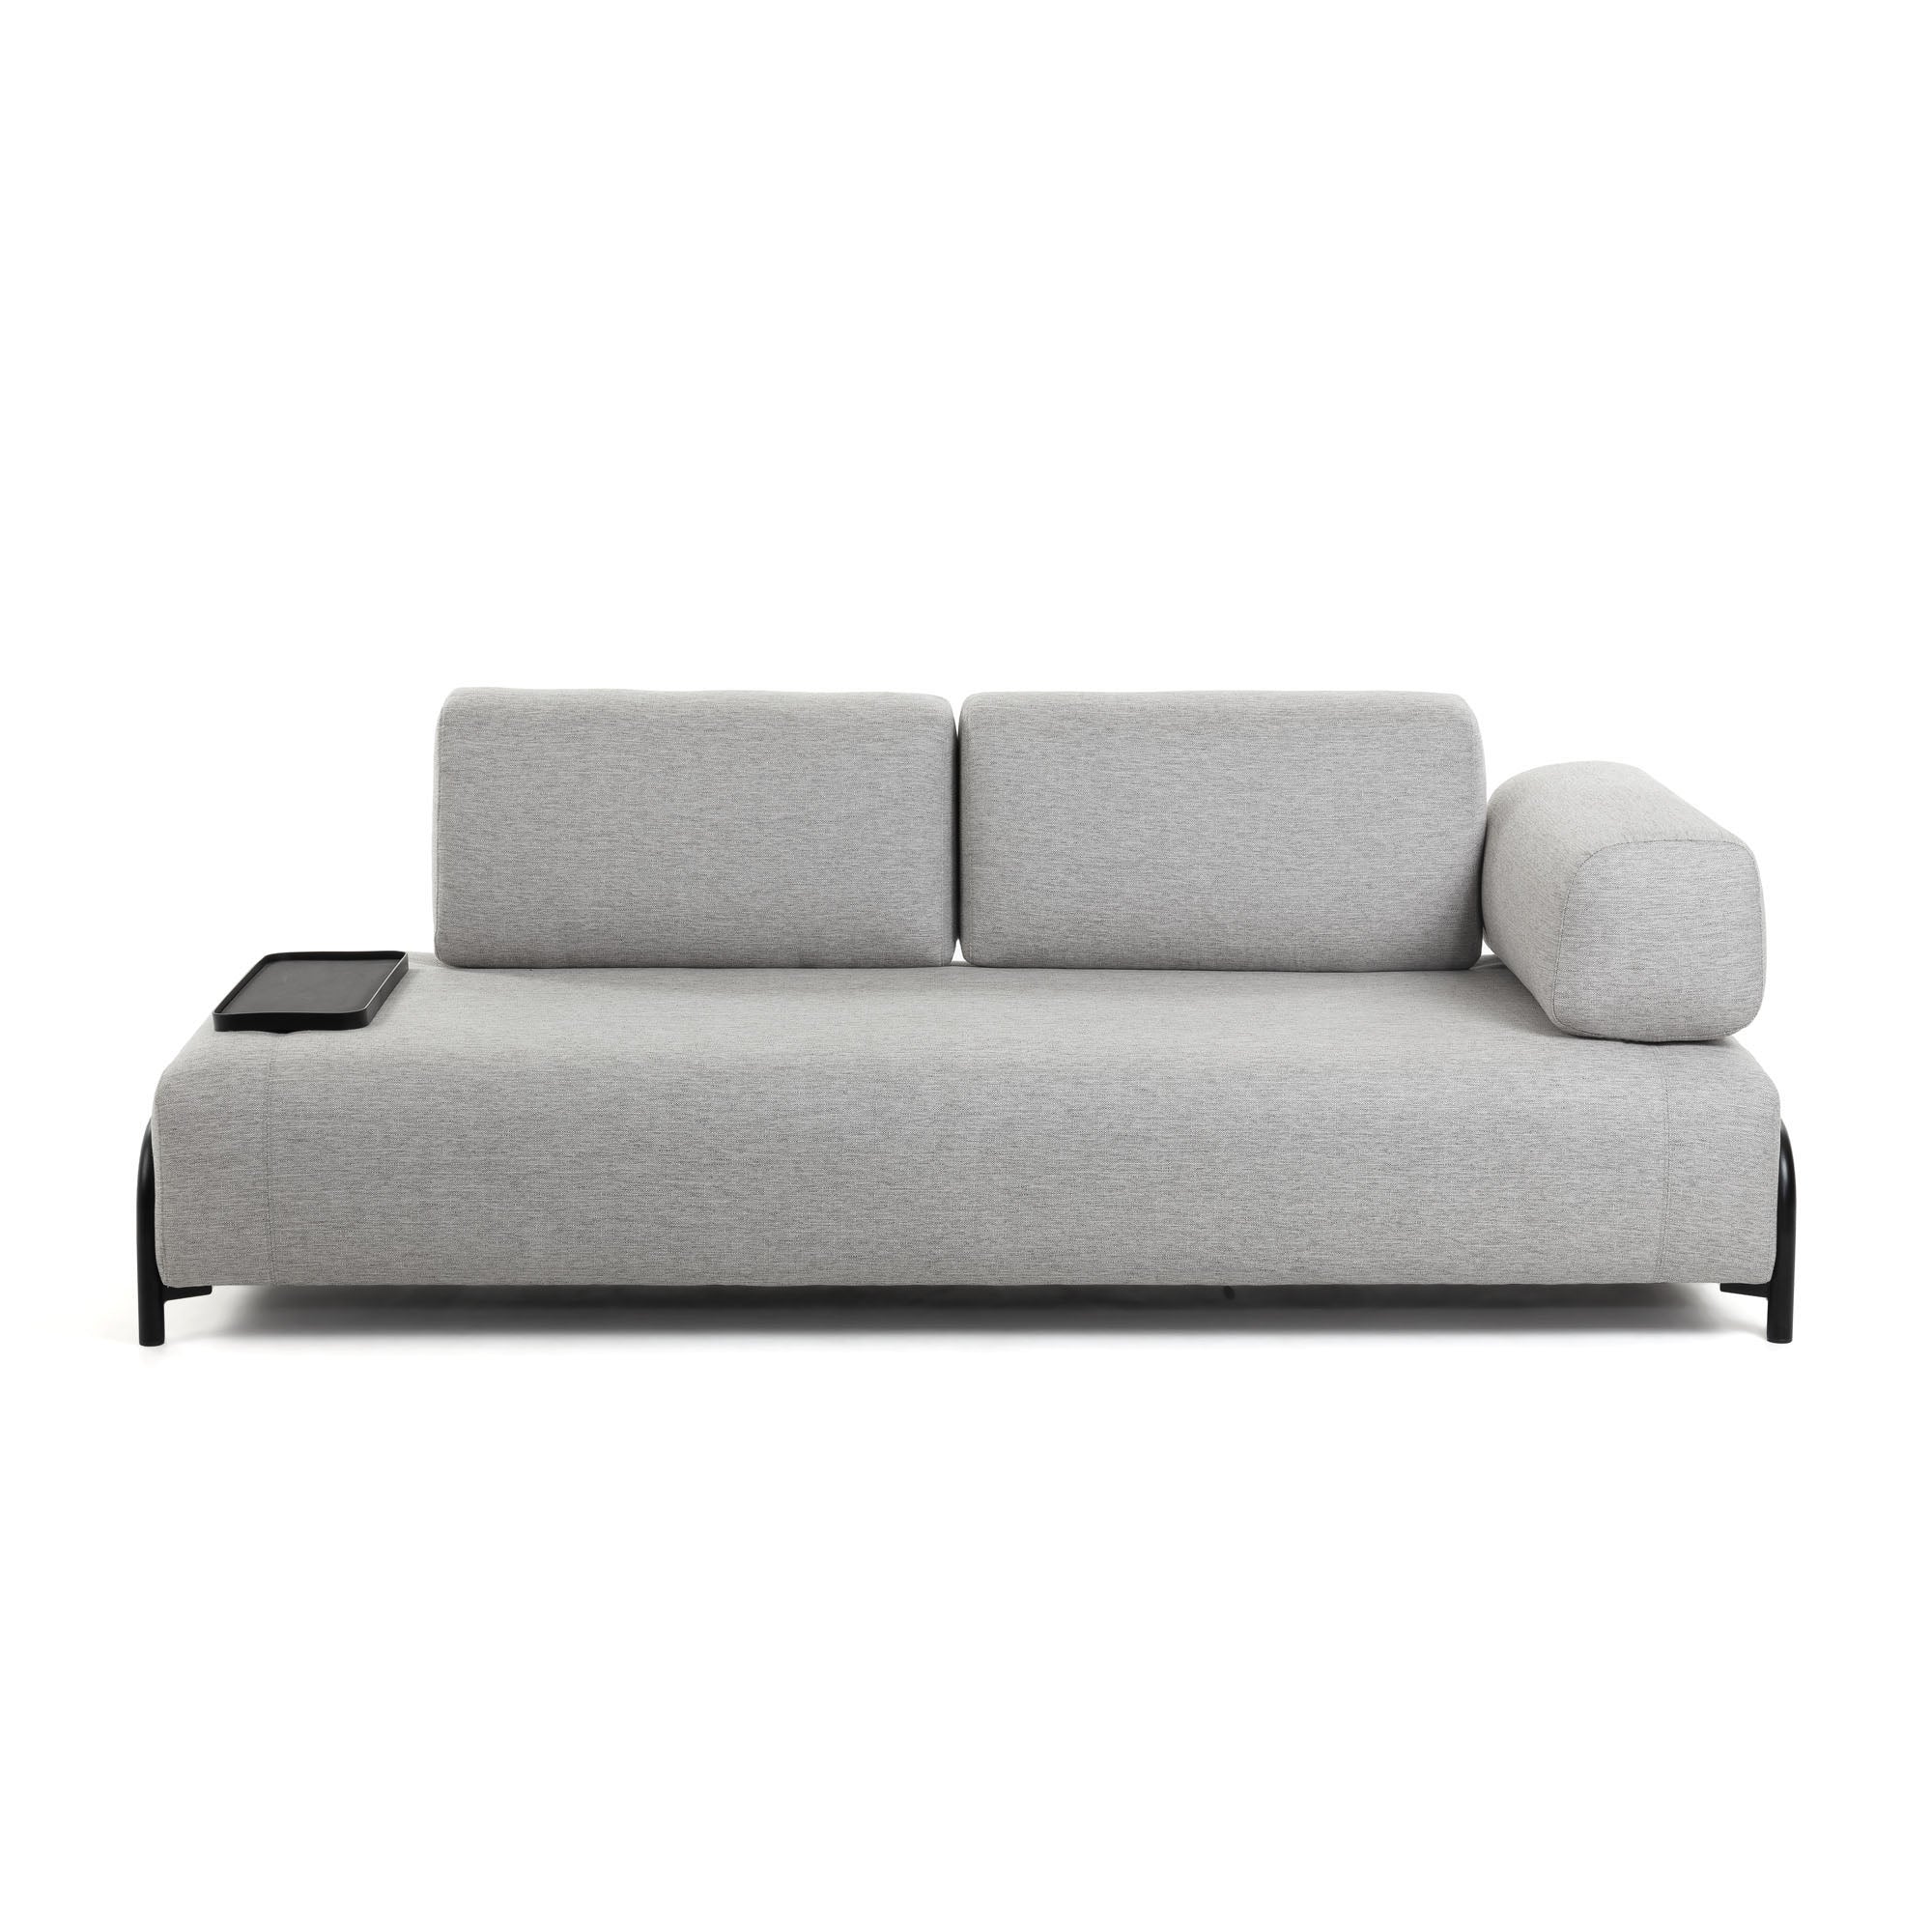 Compo 3 seater sofa with small tray in light grey, 232 cm